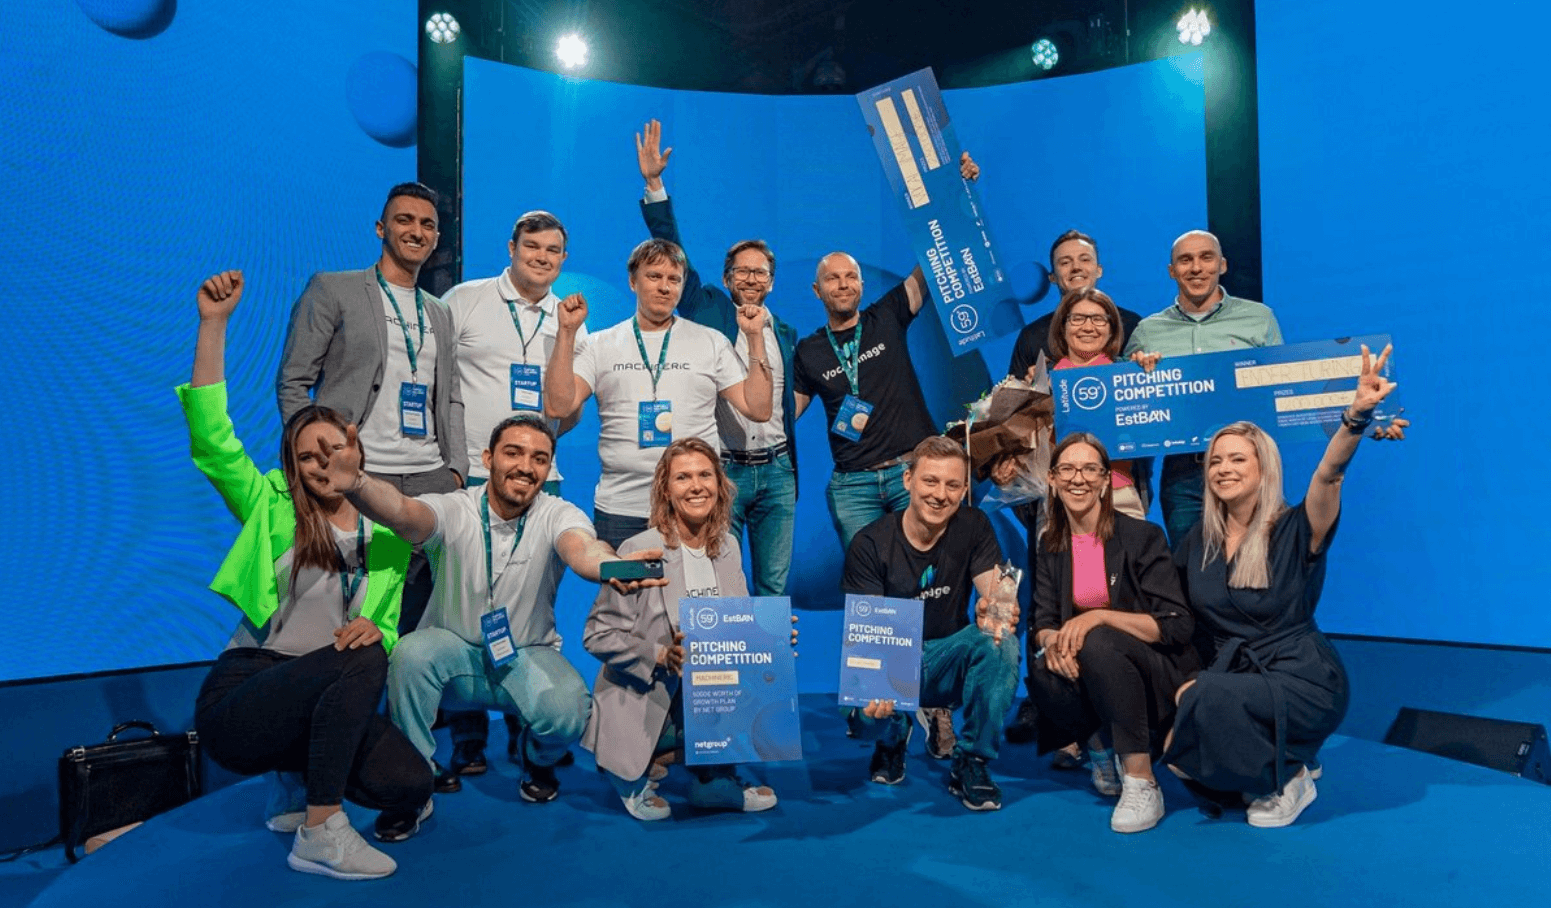 The two winning teams of Latitude59 conference with the prizes